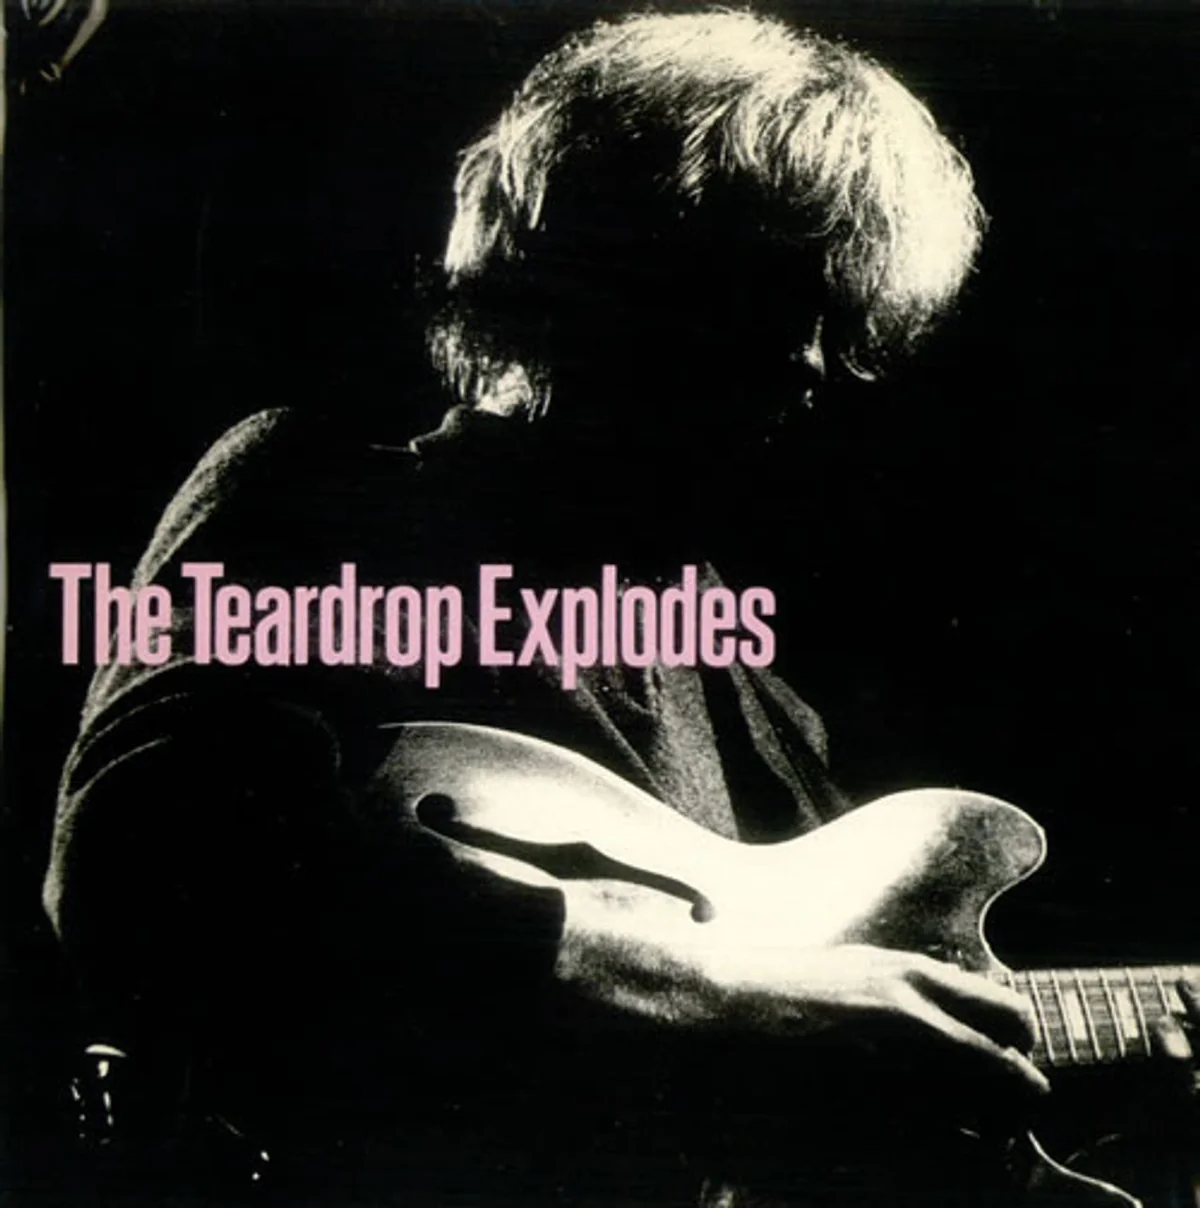 The Teardrop Explodes — You Disappear from View cover artwork